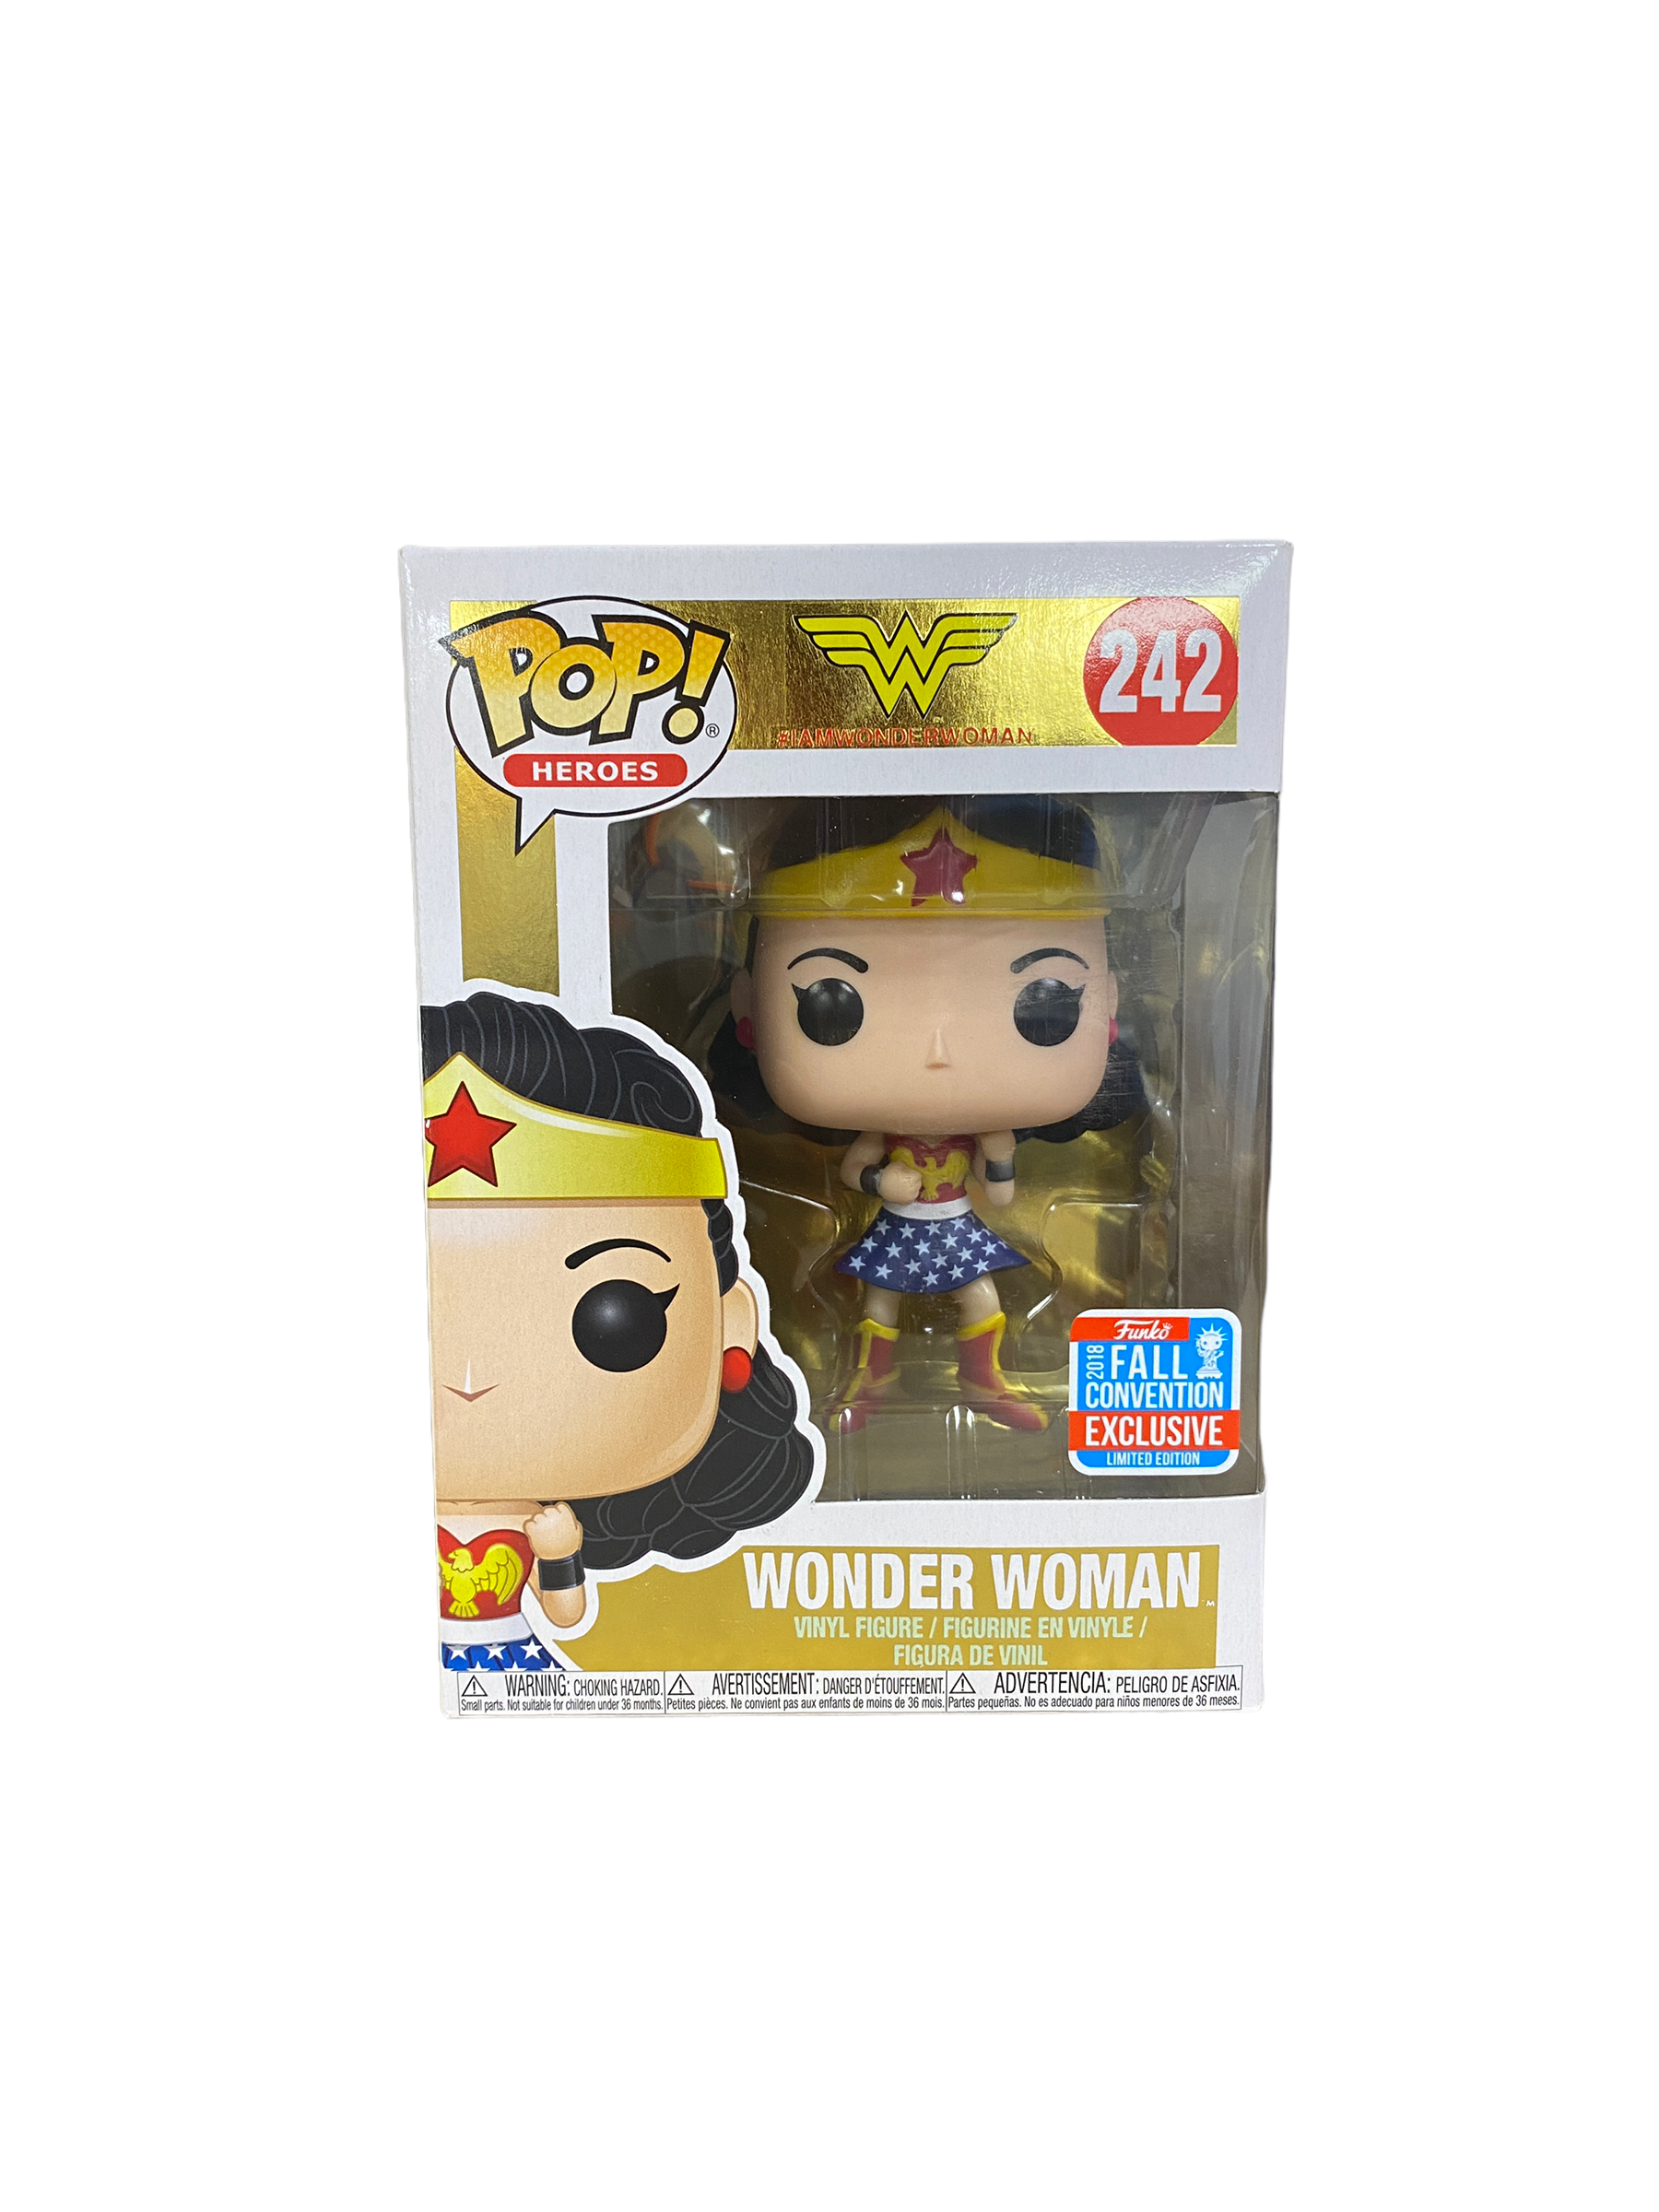 Wonder Woman #242 (First Appearance) Funko Pop! - Wonder Woman - NYCC 2018 Shared Exclusive - Condition 8.5/10